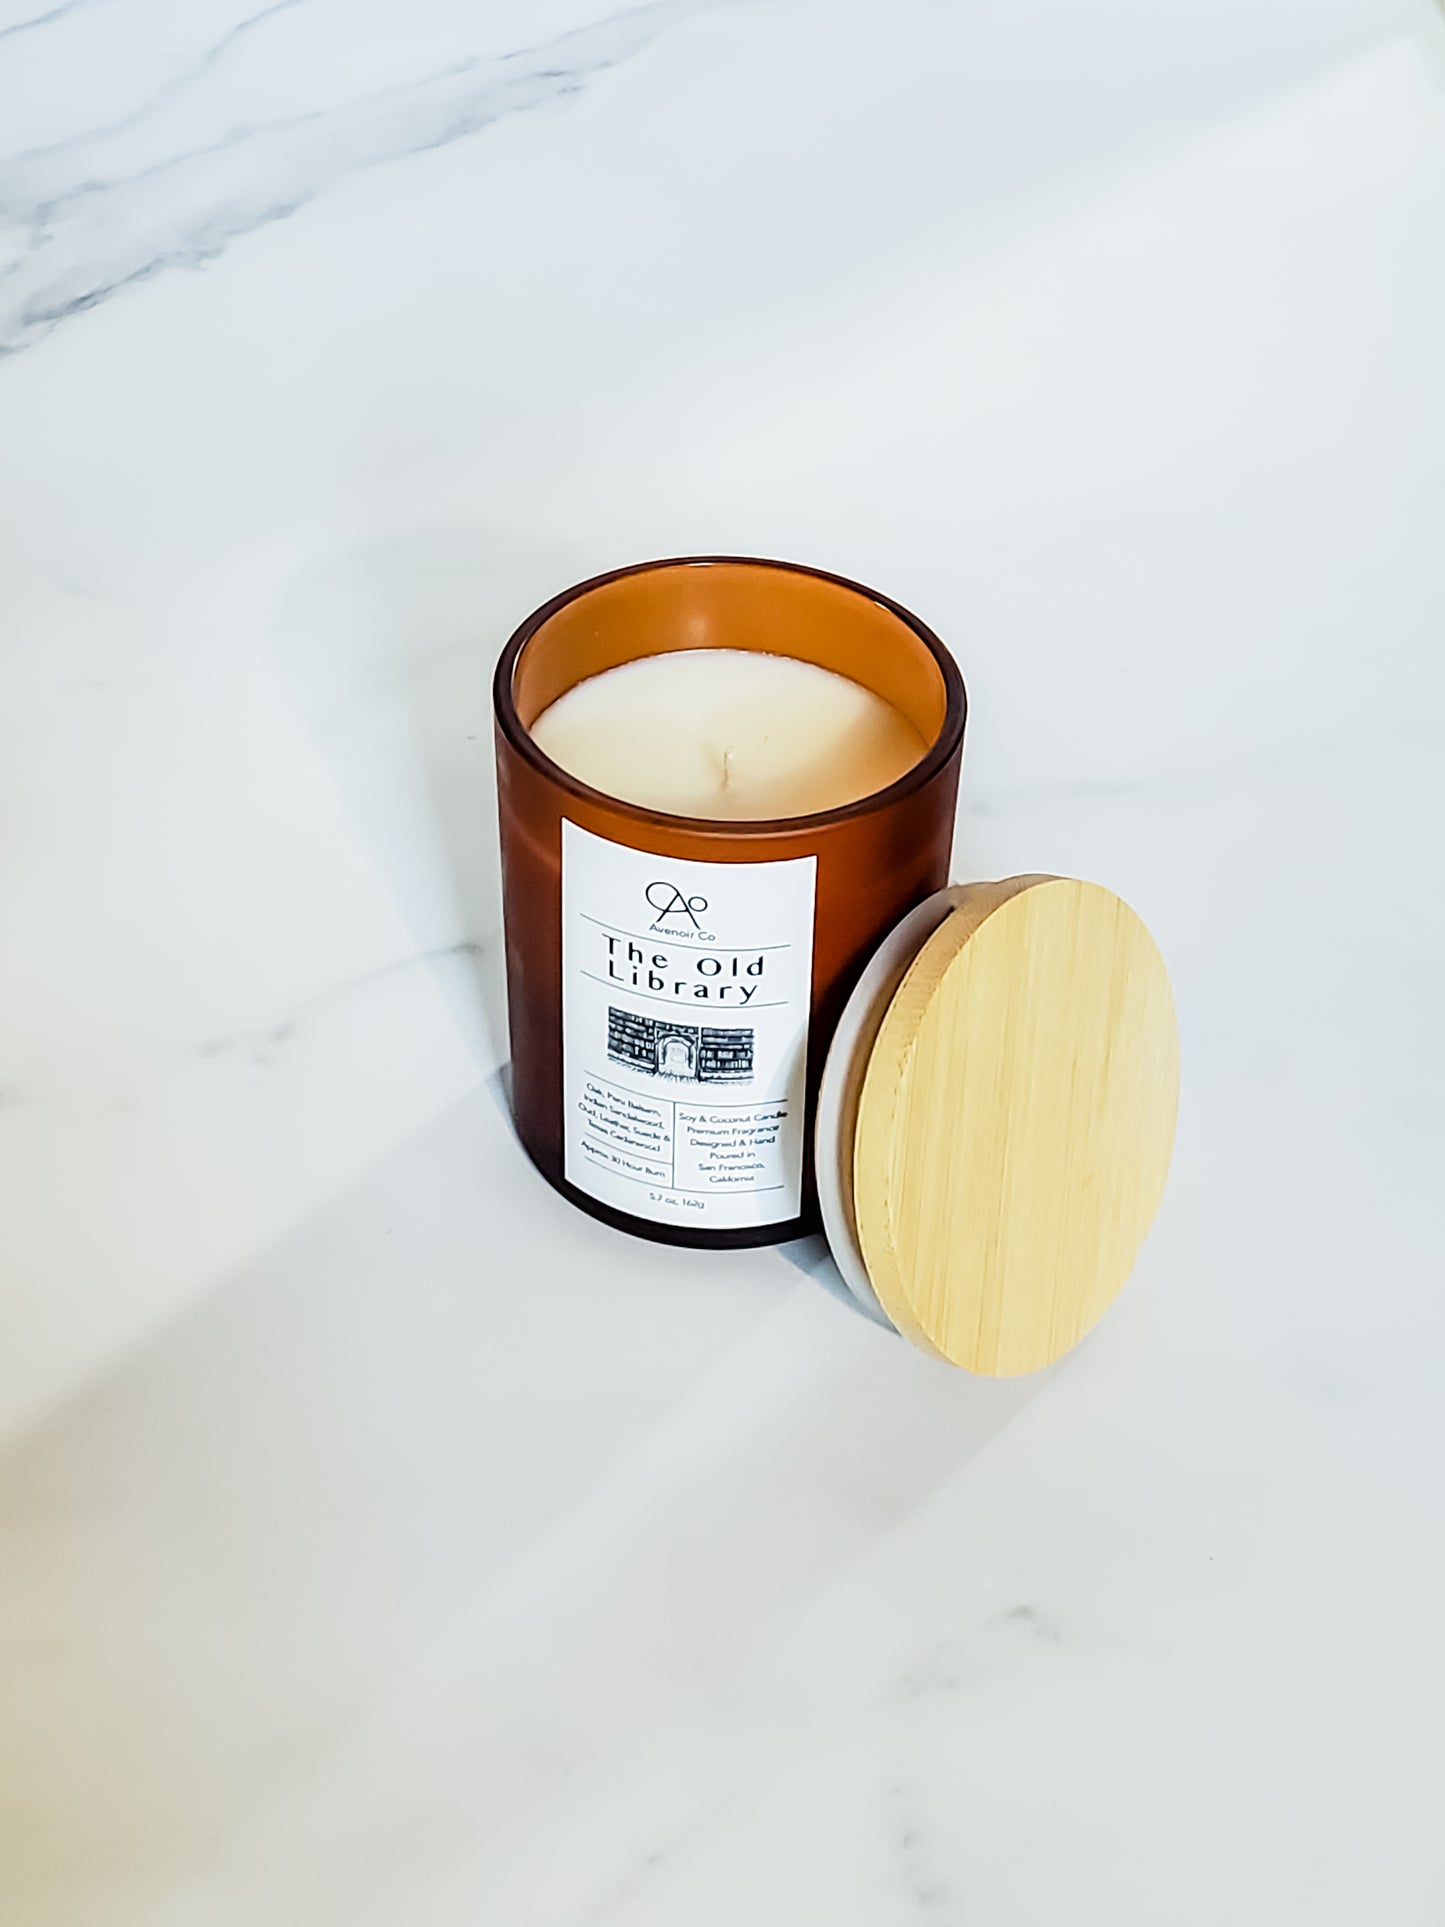 The Old Library Scented Candle